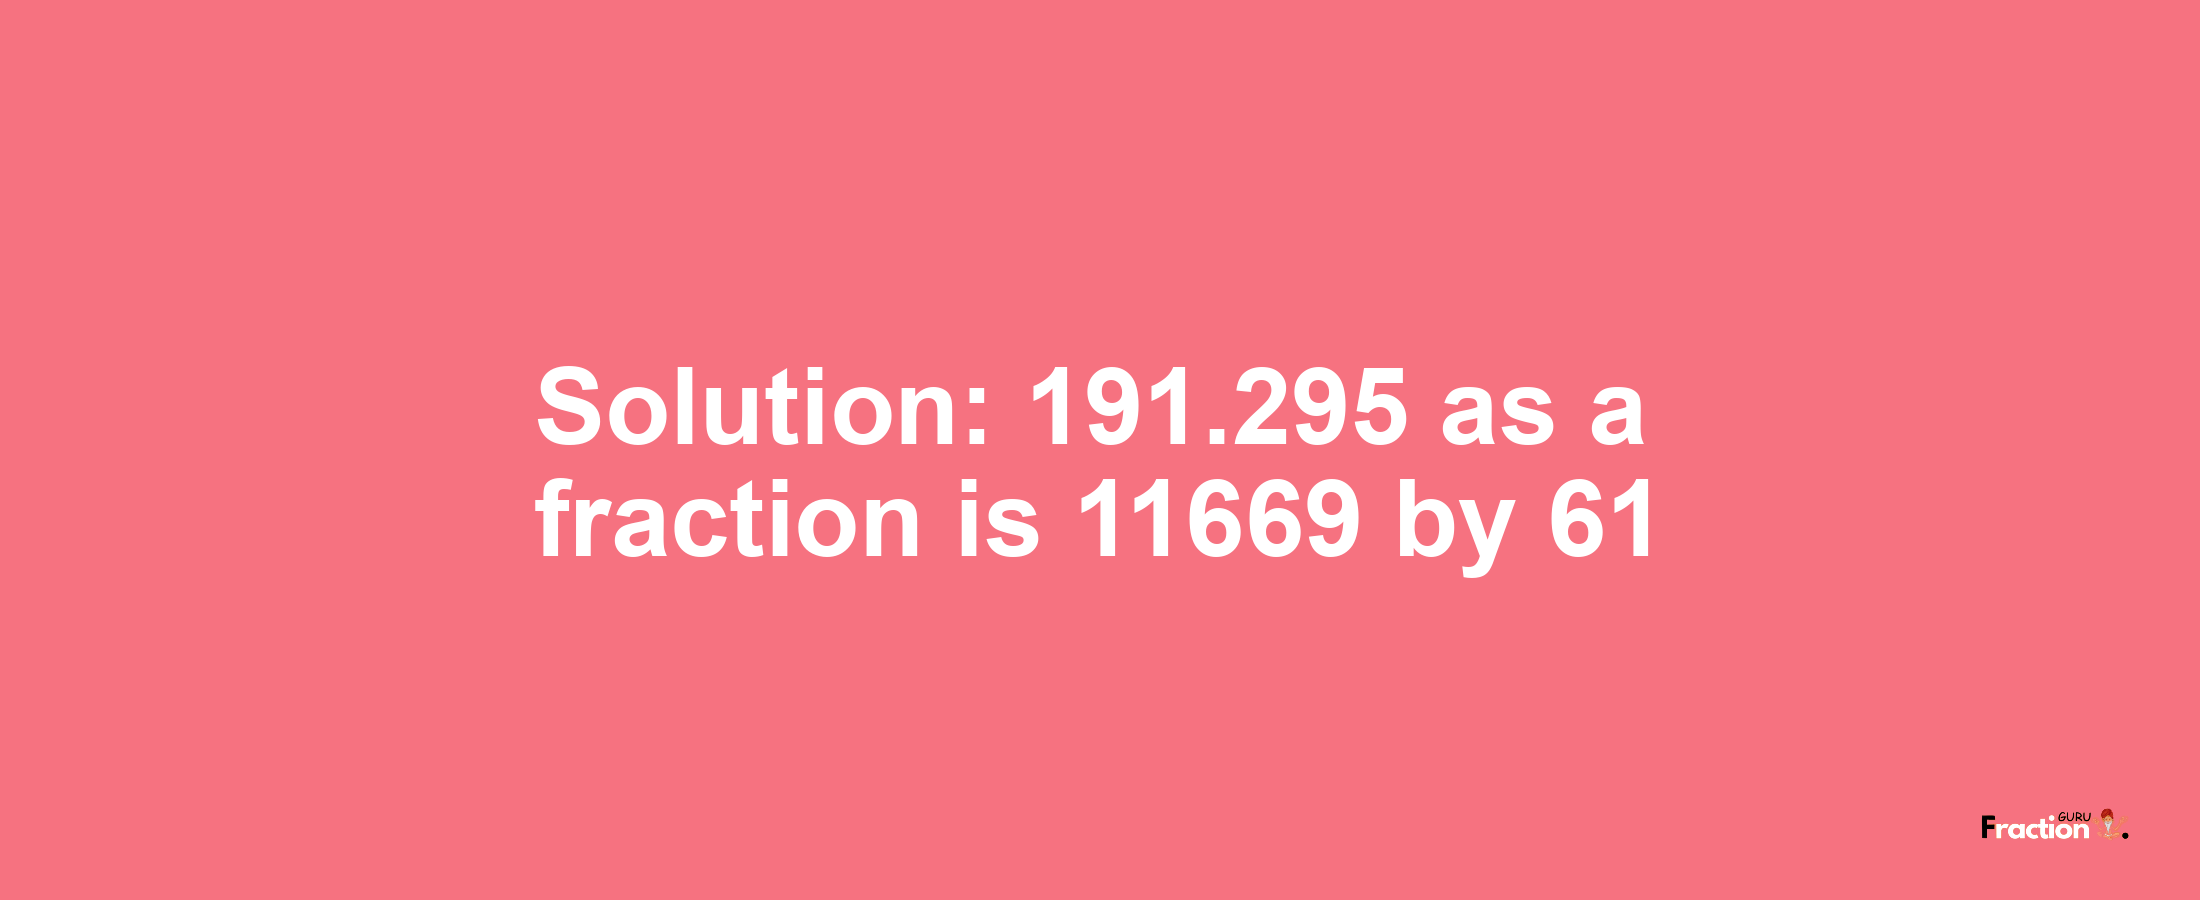 Solution:191.295 as a fraction is 11669/61